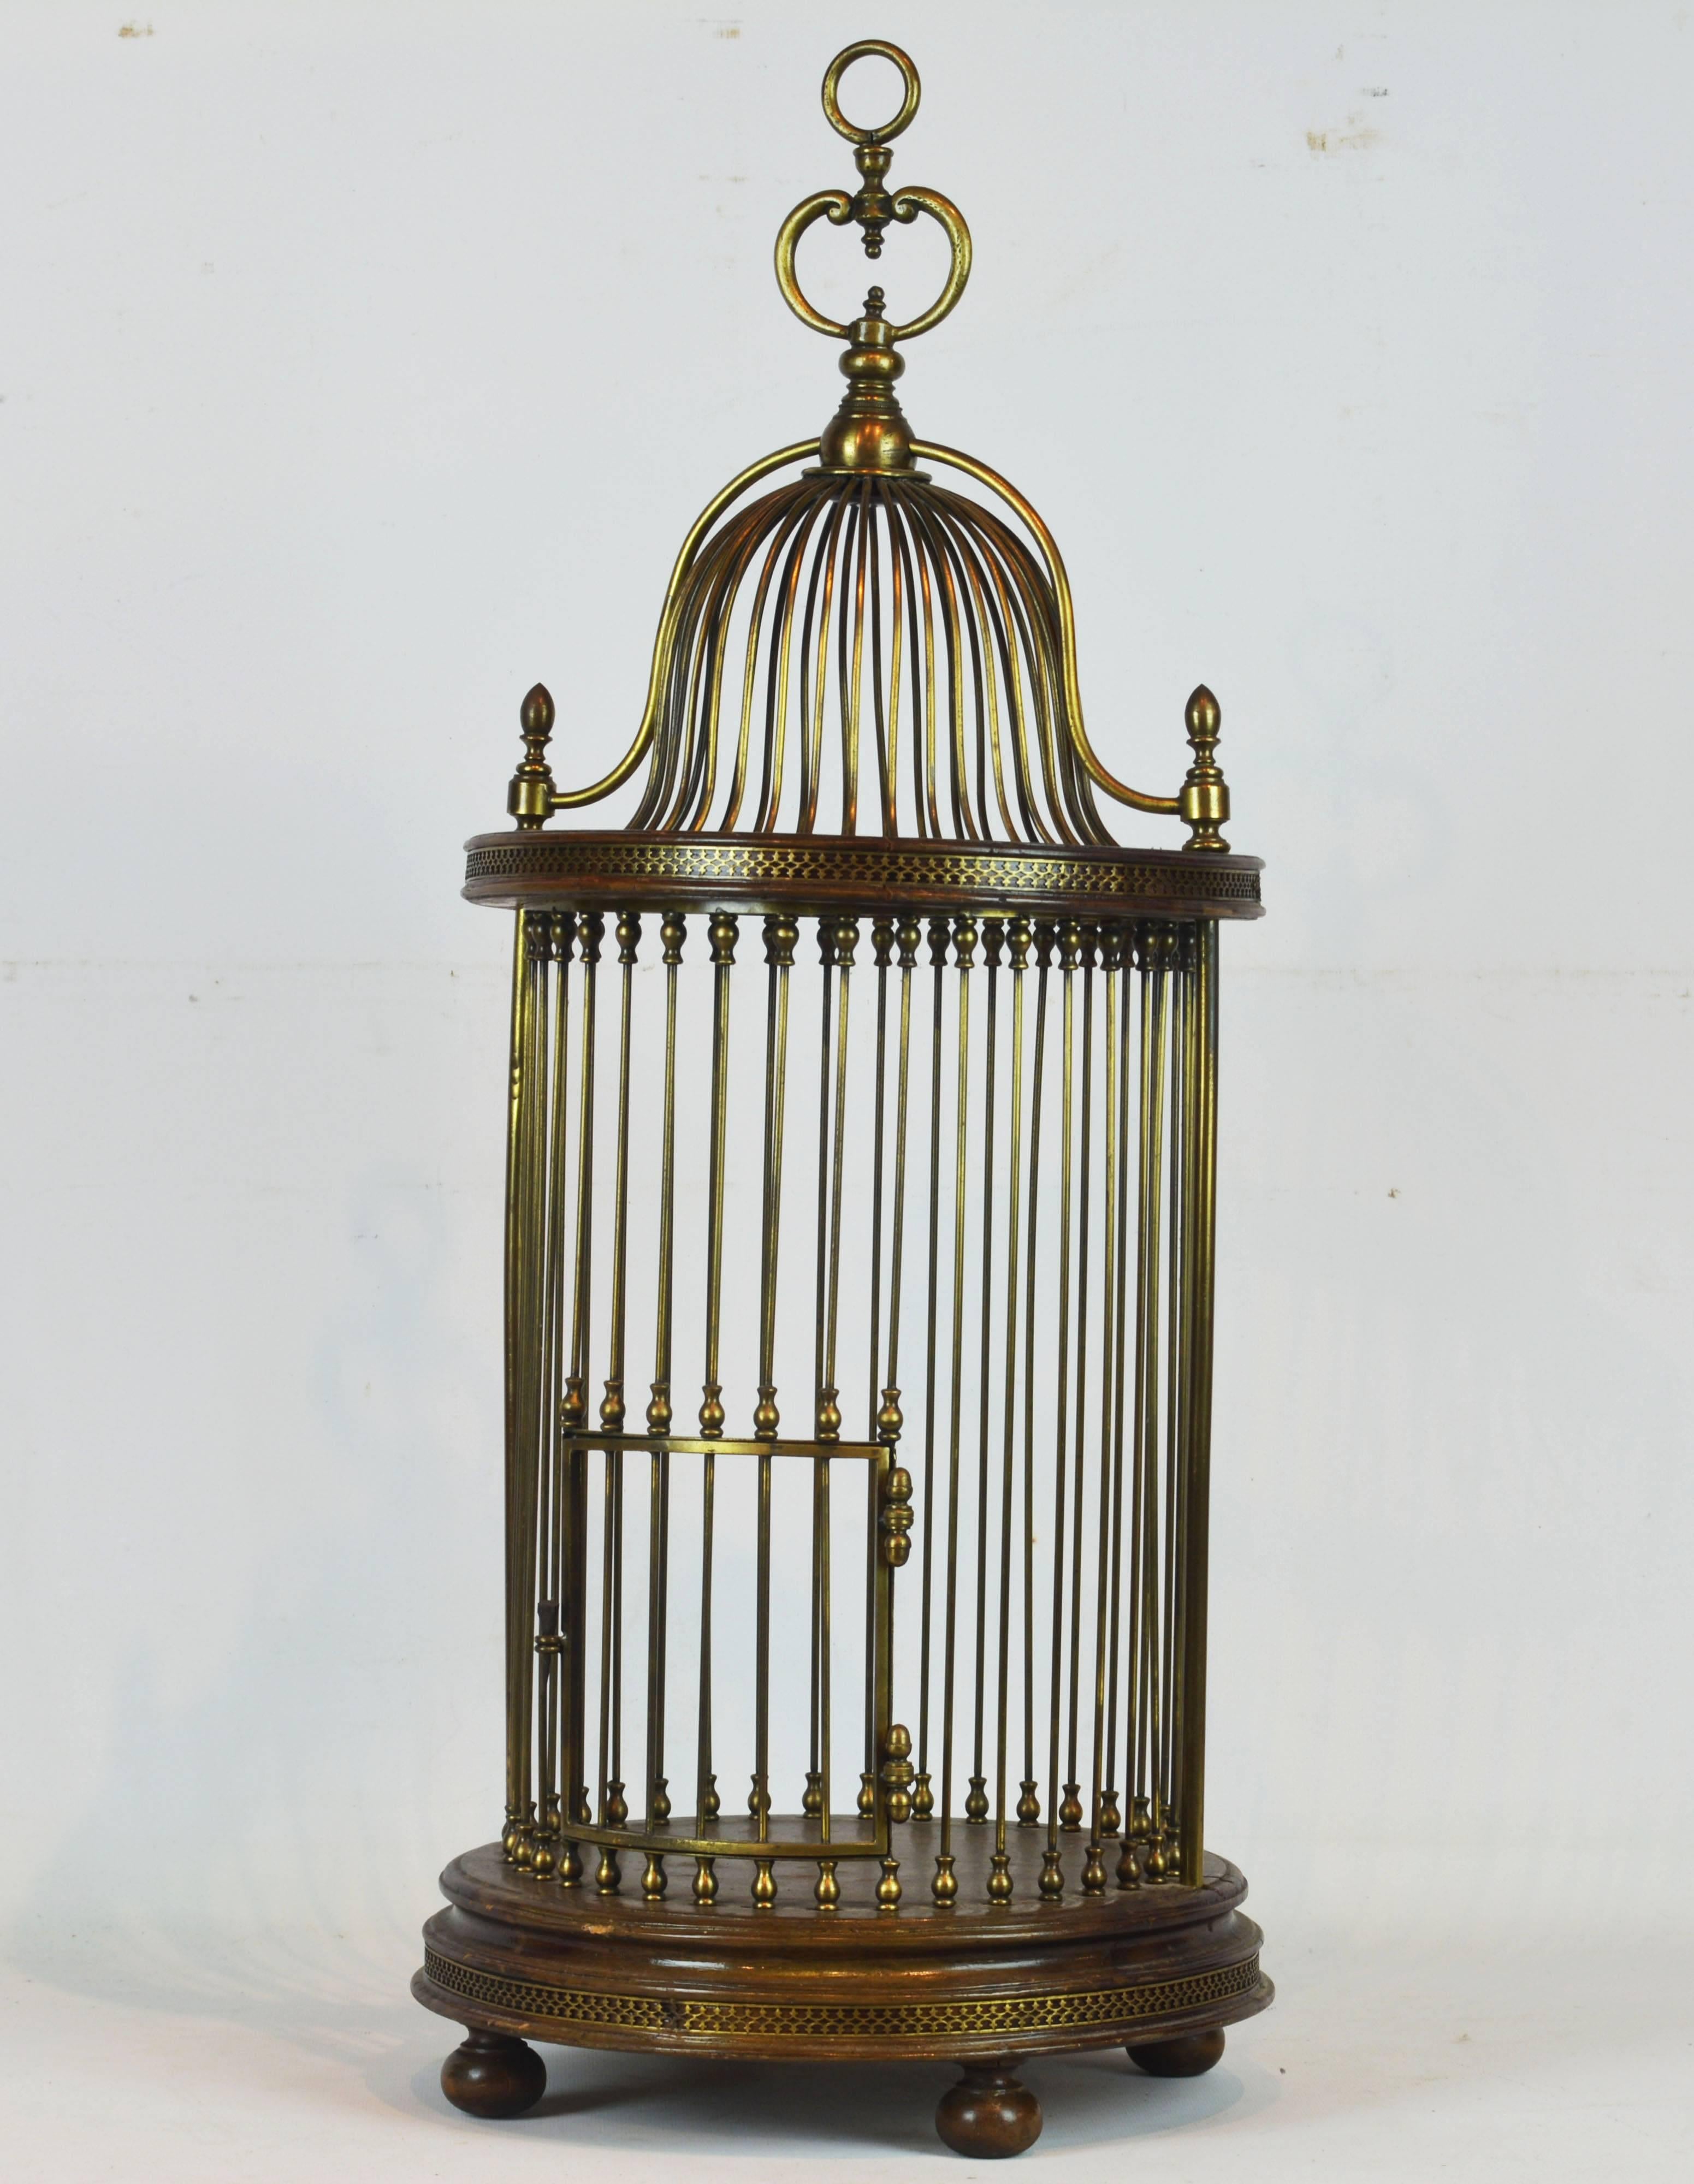 Raised on four bun feet the wooden base platform, accented by reticulated brass bands, supports the circular cage with hinged door and a wooden pediment likewise embellished and surmounted by the oriental style cupola.